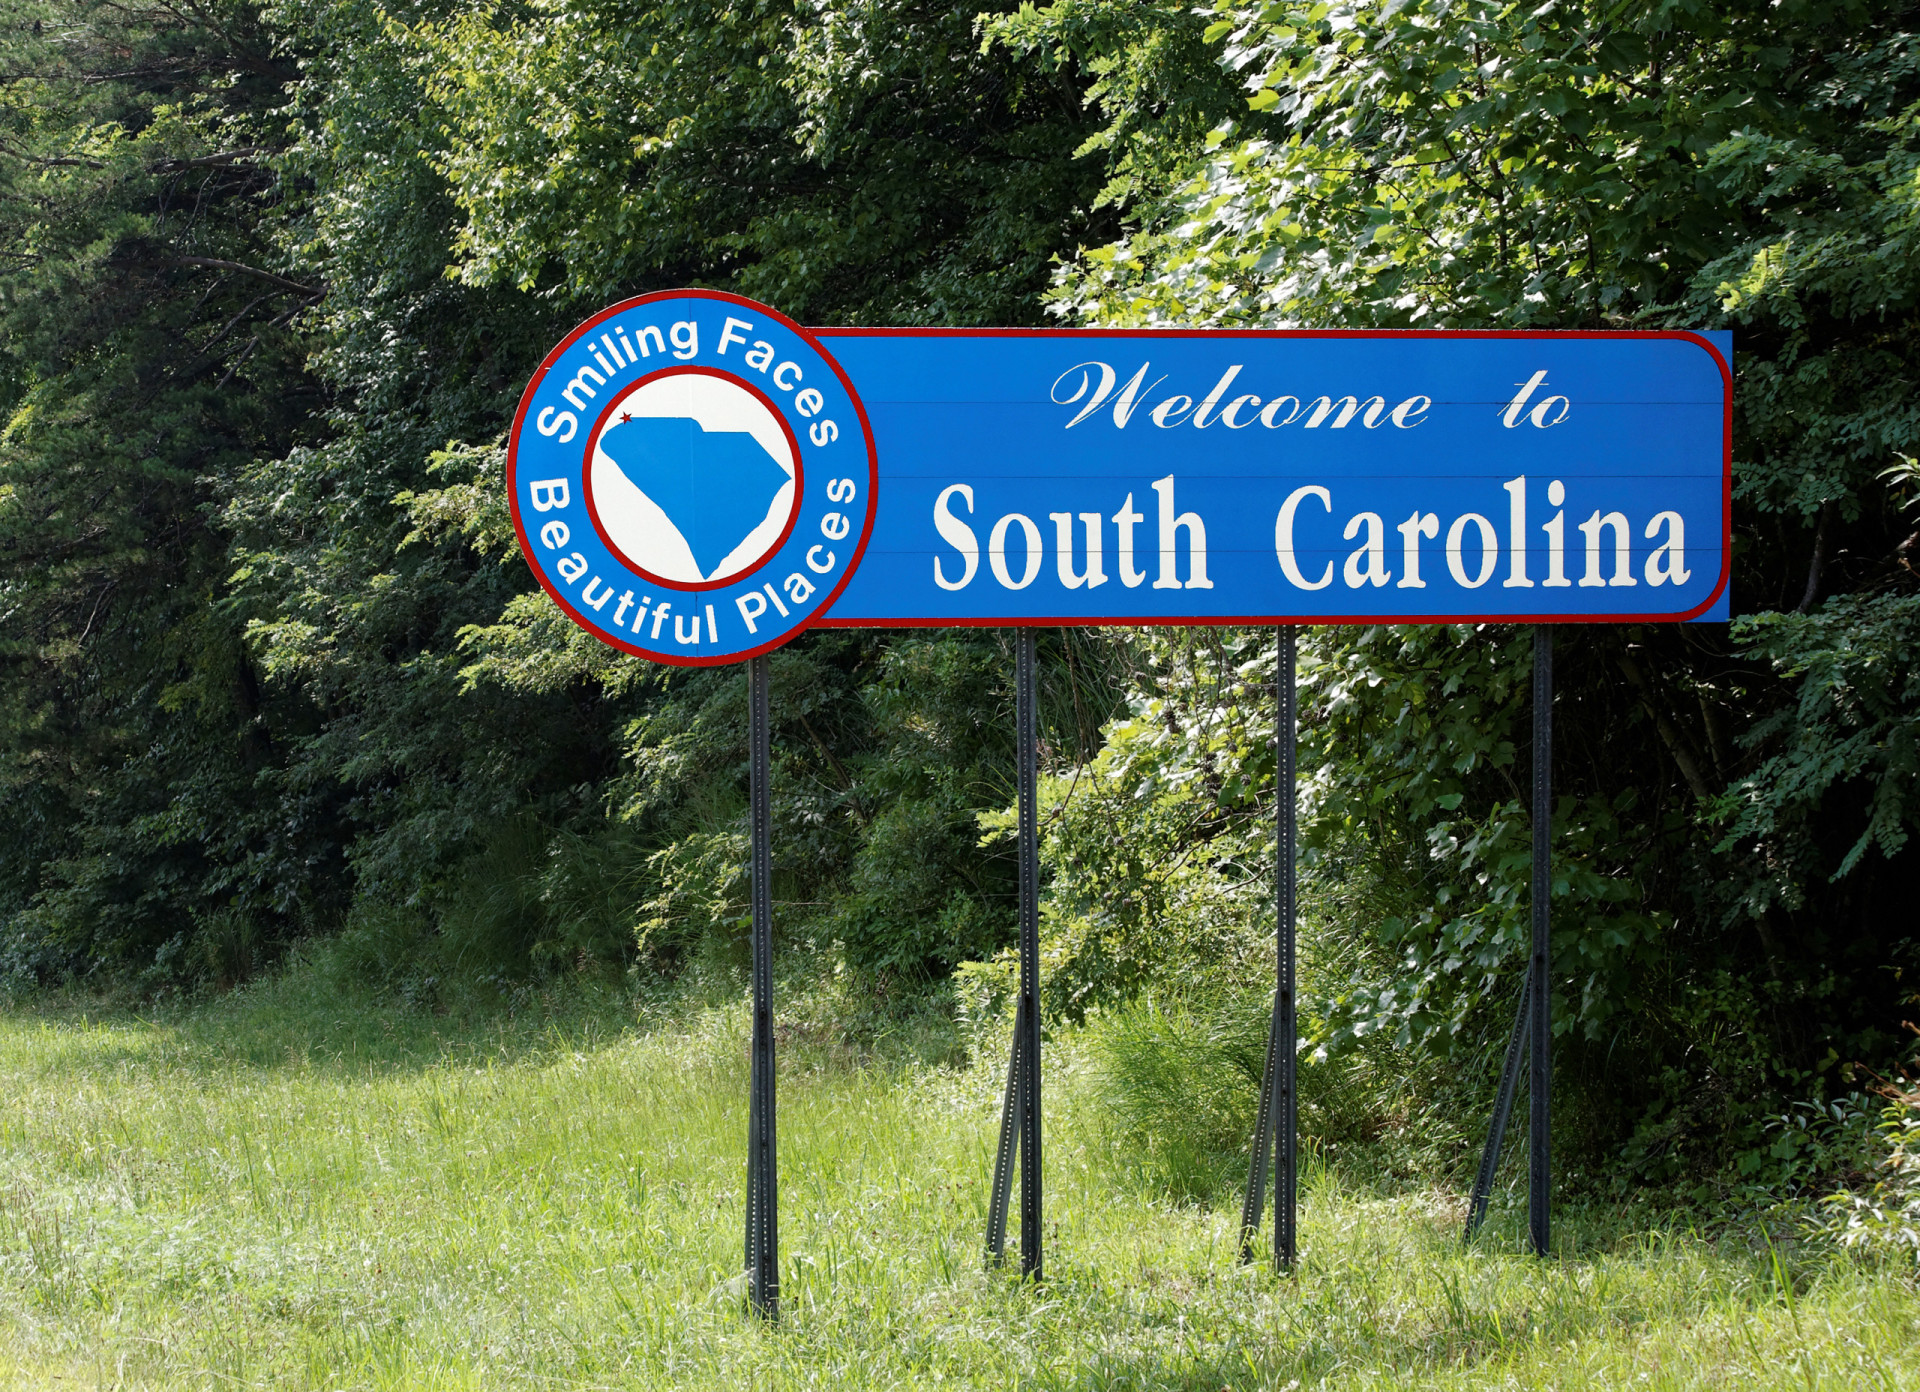 <p>"Smiling Faces, Beautiful Places" is what one expects to find in the Palmetto State.</p>